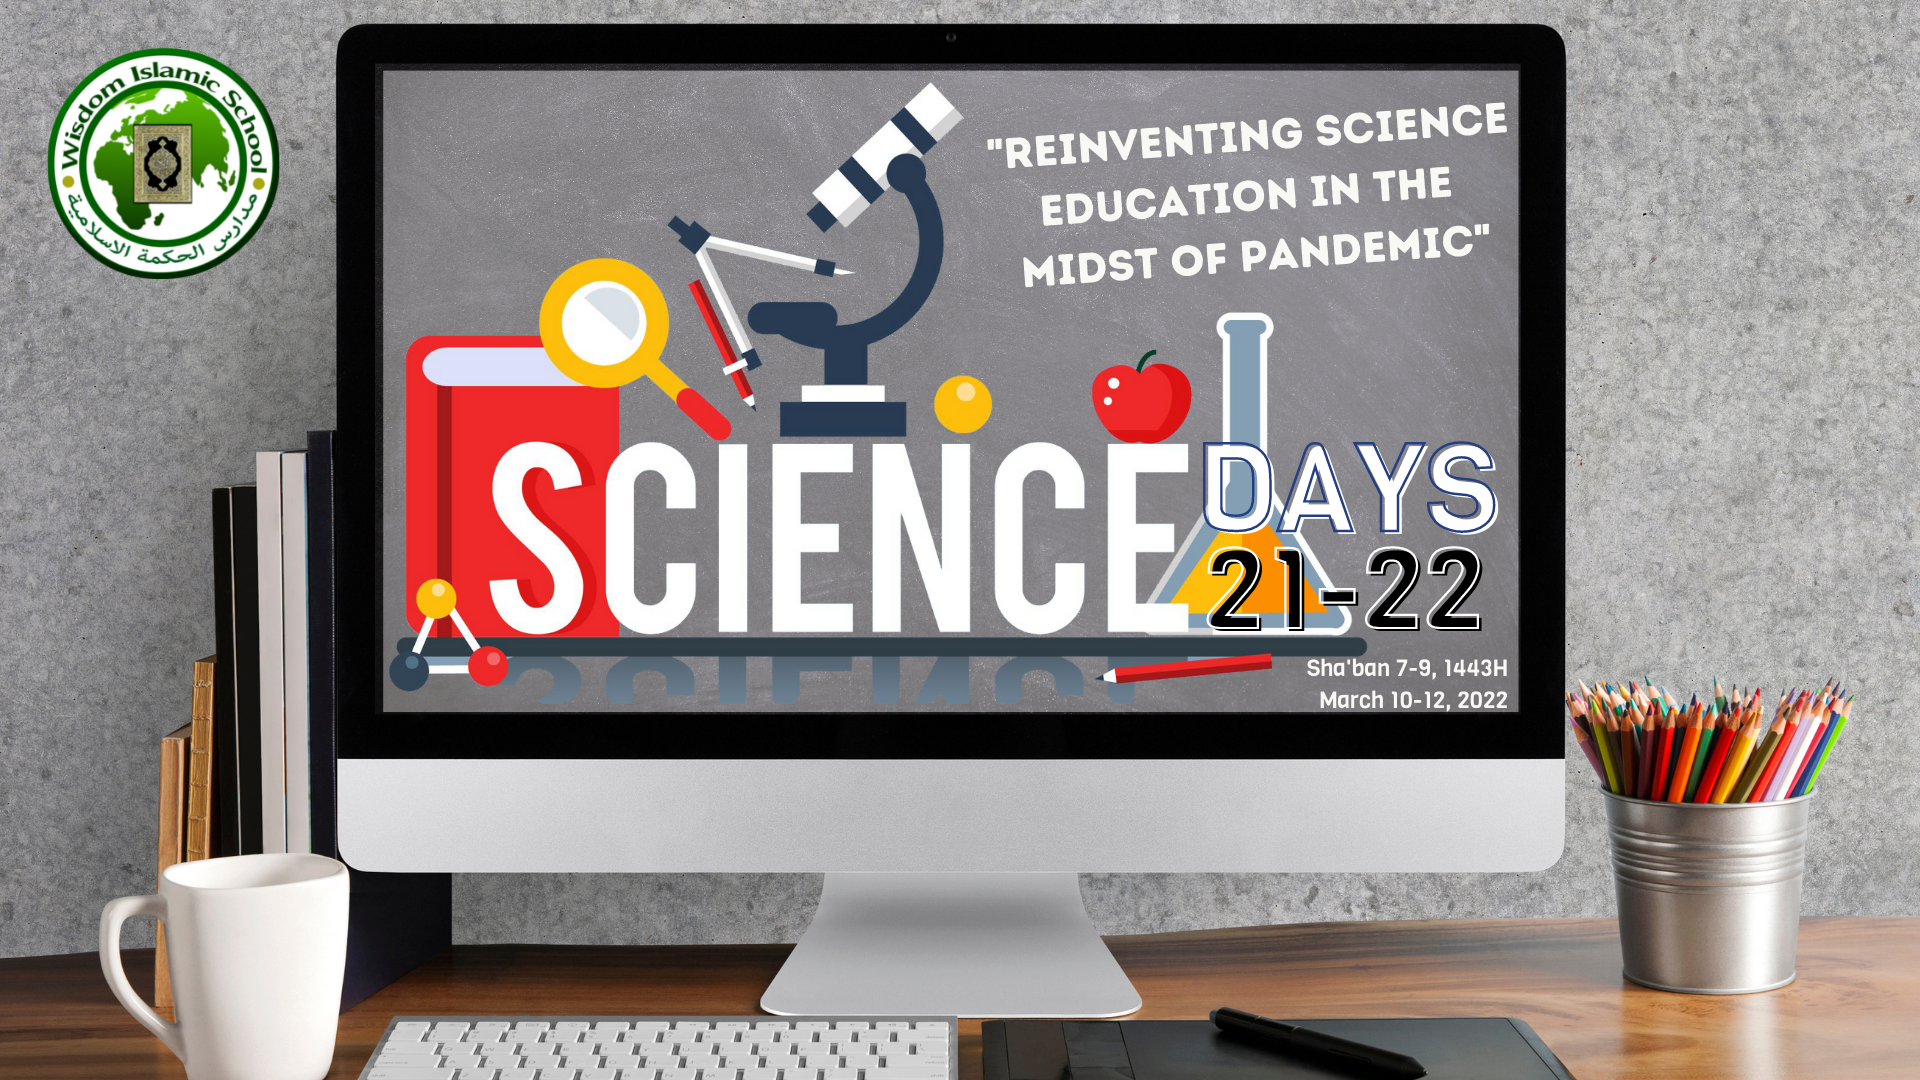 Science Days 21-22 event cover photo